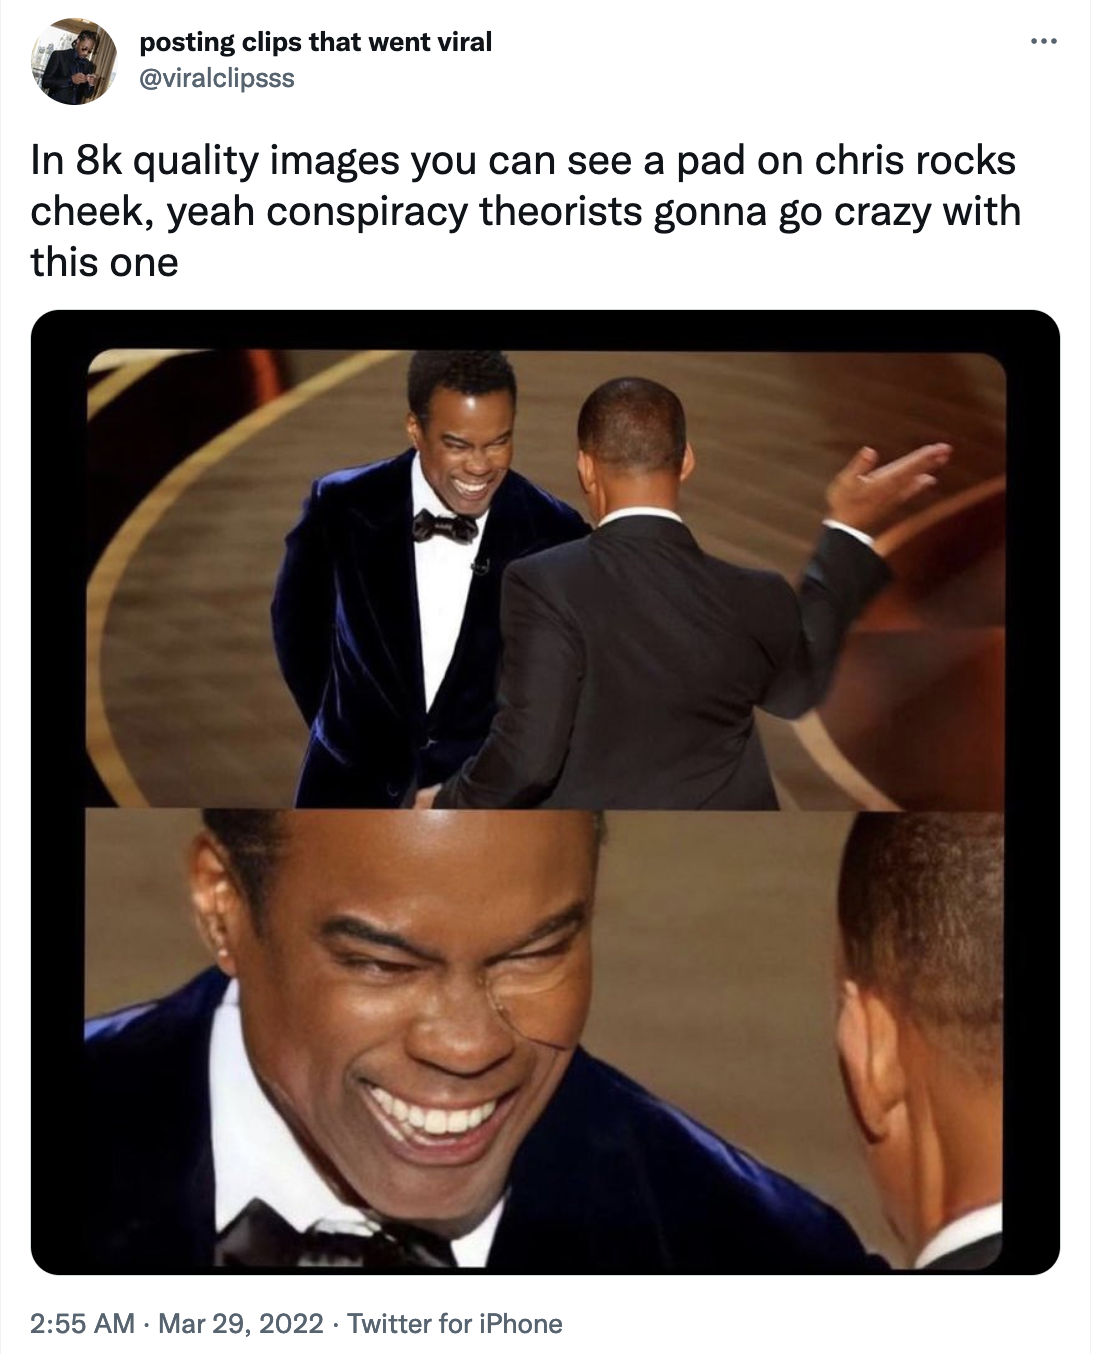 A viral image from Twitter purporting to show Chris Rock wearing a pad on his cheek before Will Smith slapped him. (Screenshot: Twitter)